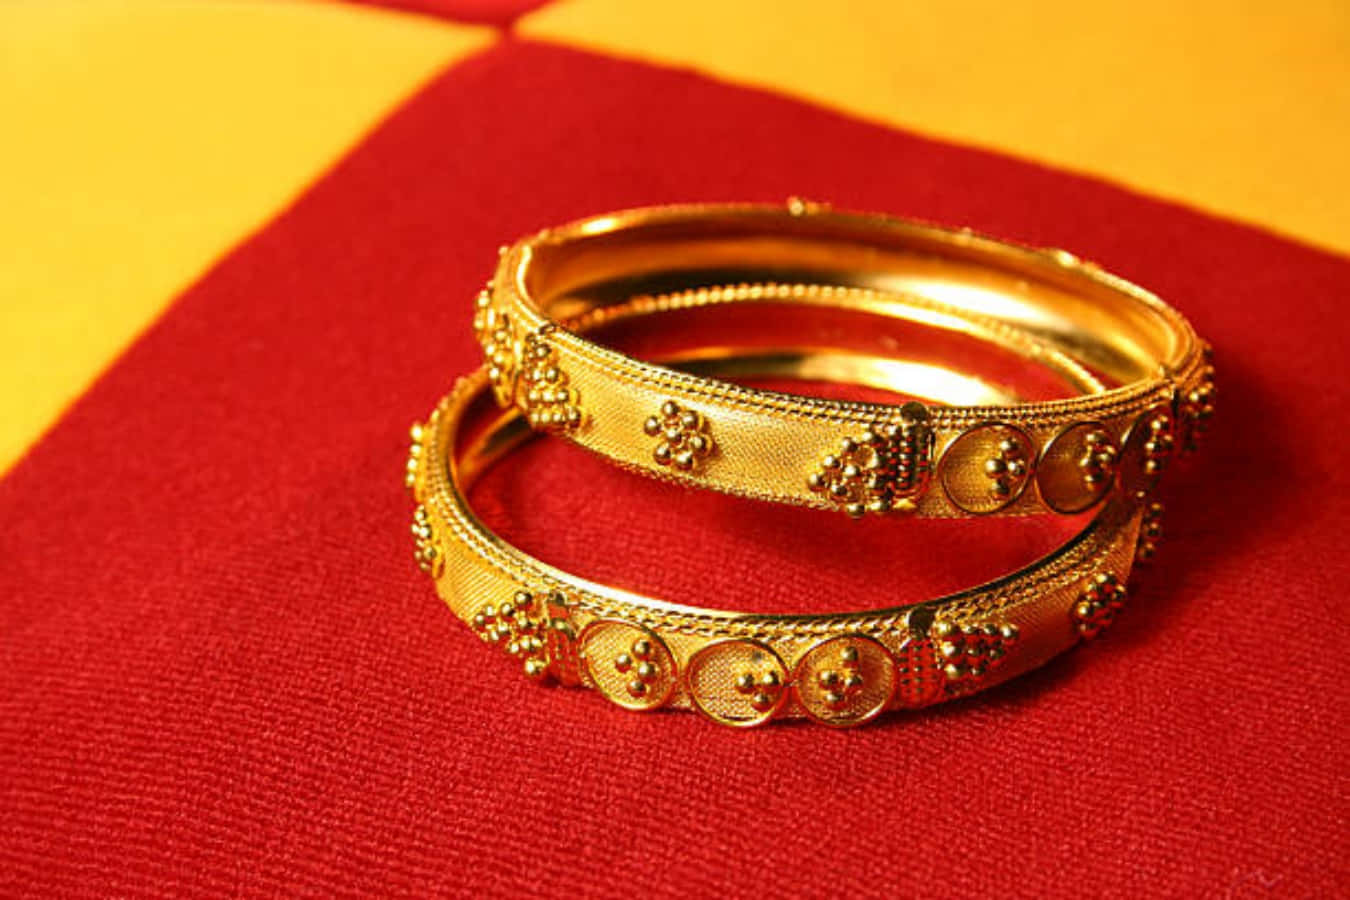 Gold Bangles On A Red And Yellow Cloth